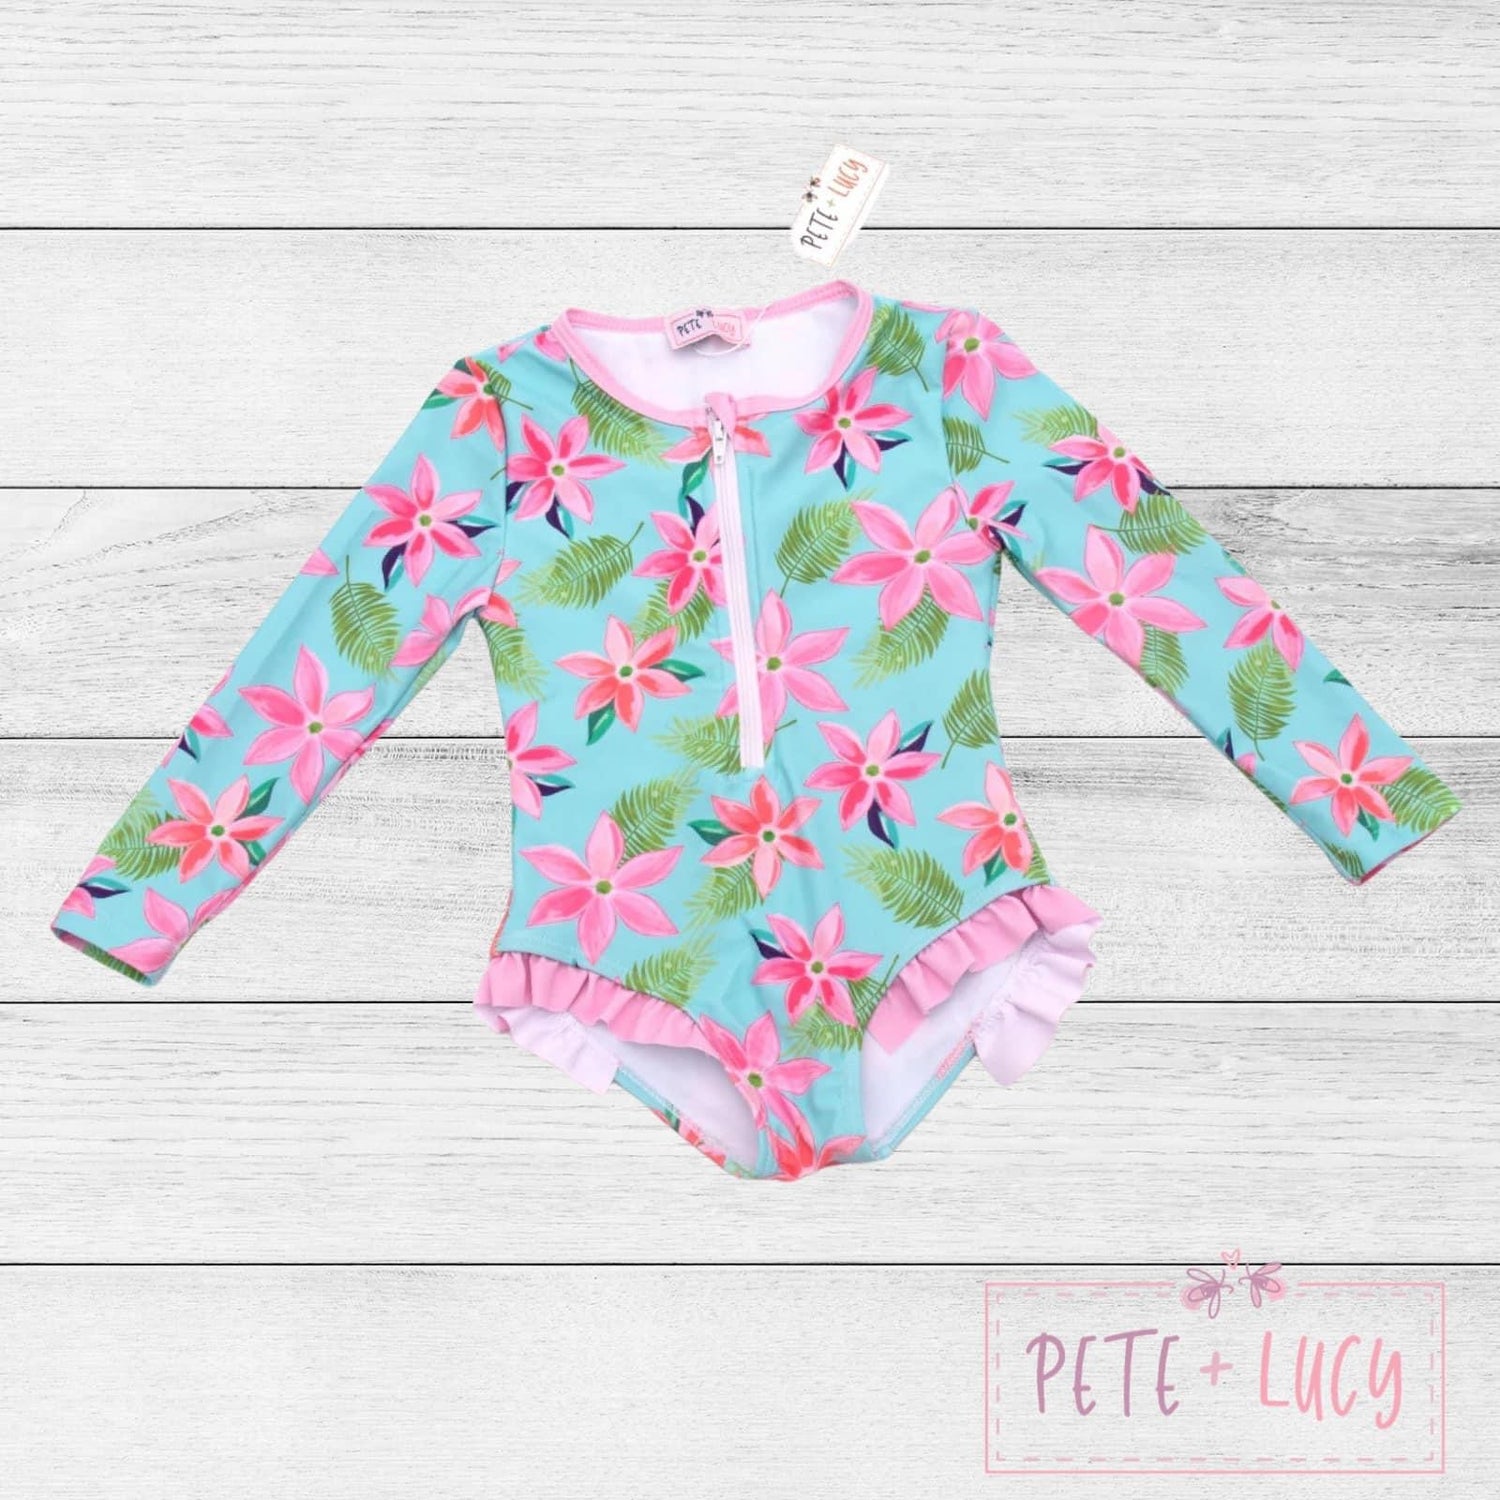 Pete & Lucy swim suit Collection